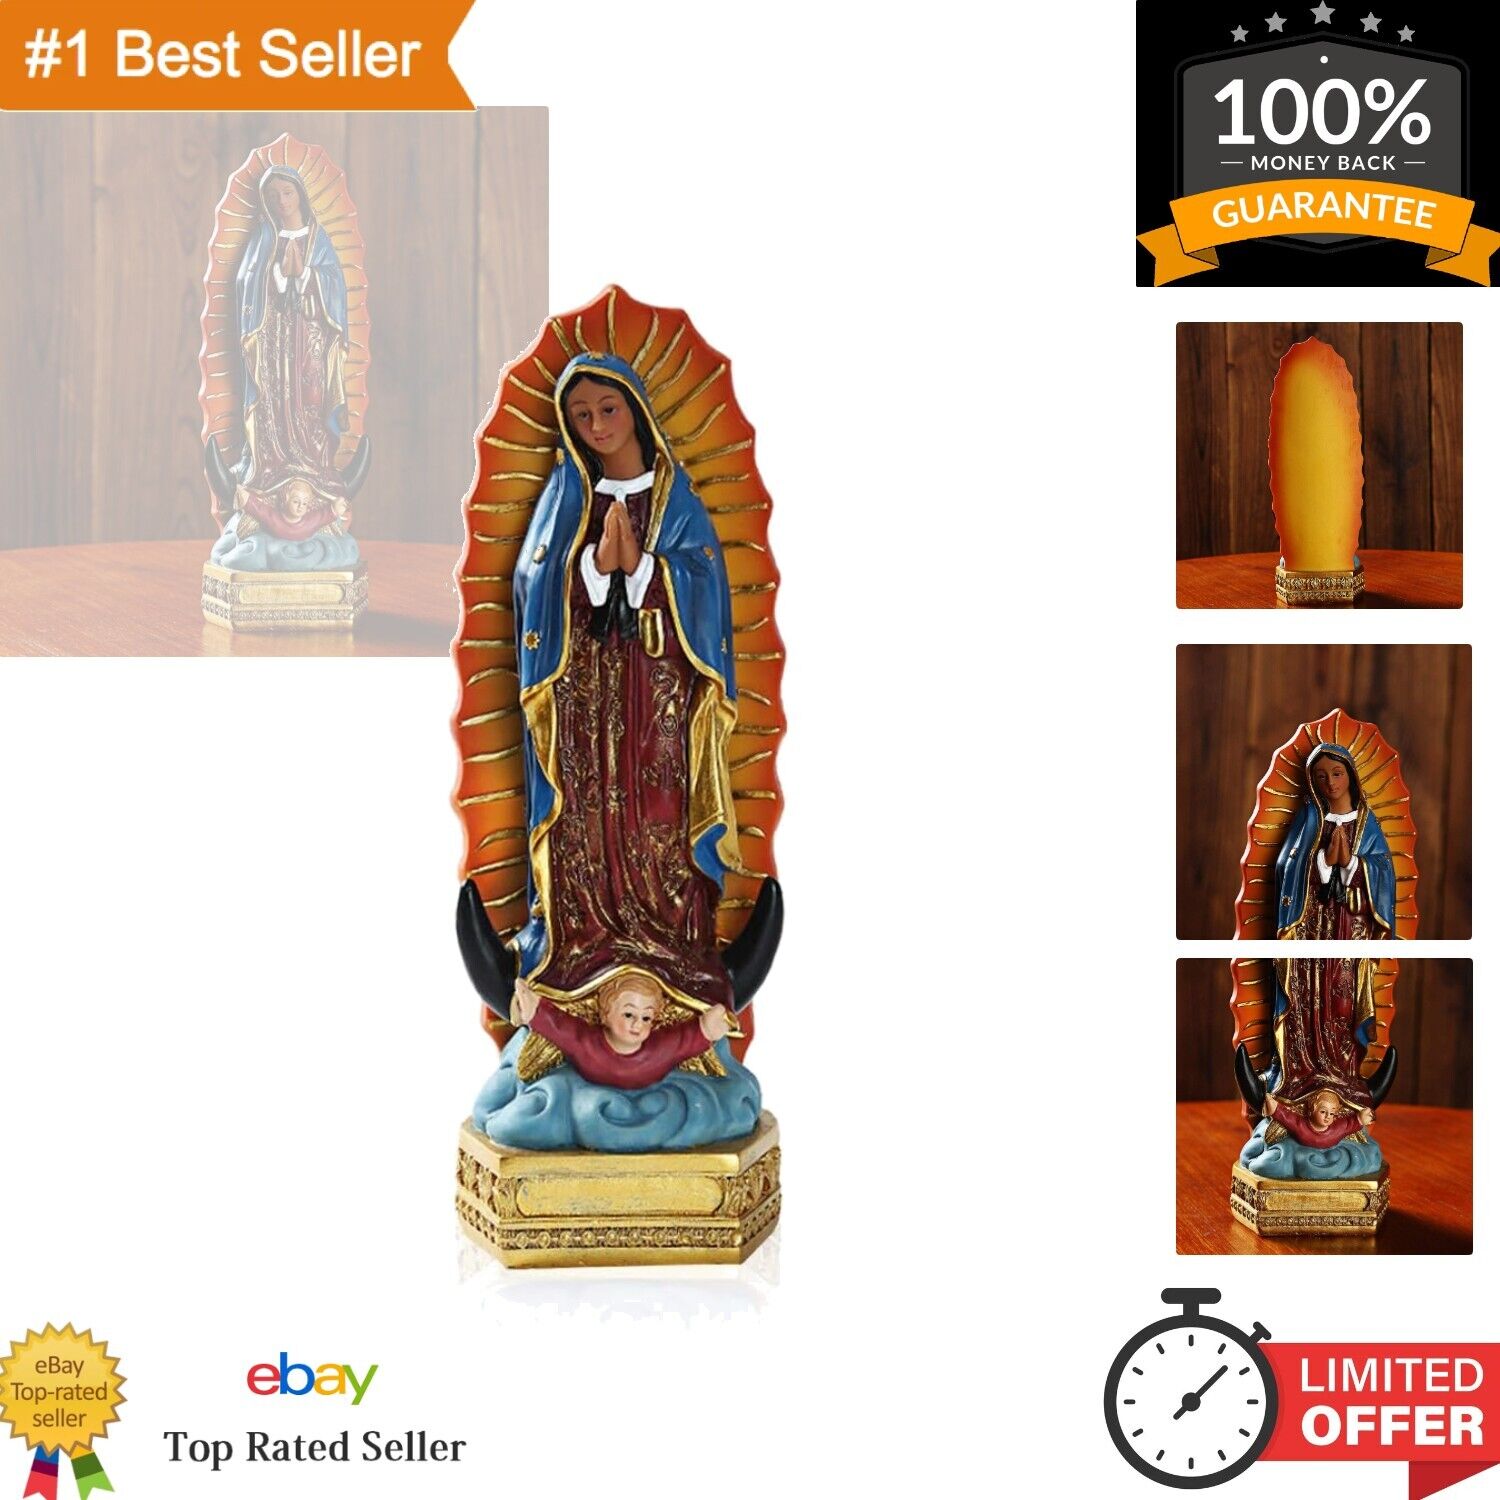 Our Lady of Guadalupe Resin Statue Sculpture - Blessed Mother Madonna Figurine